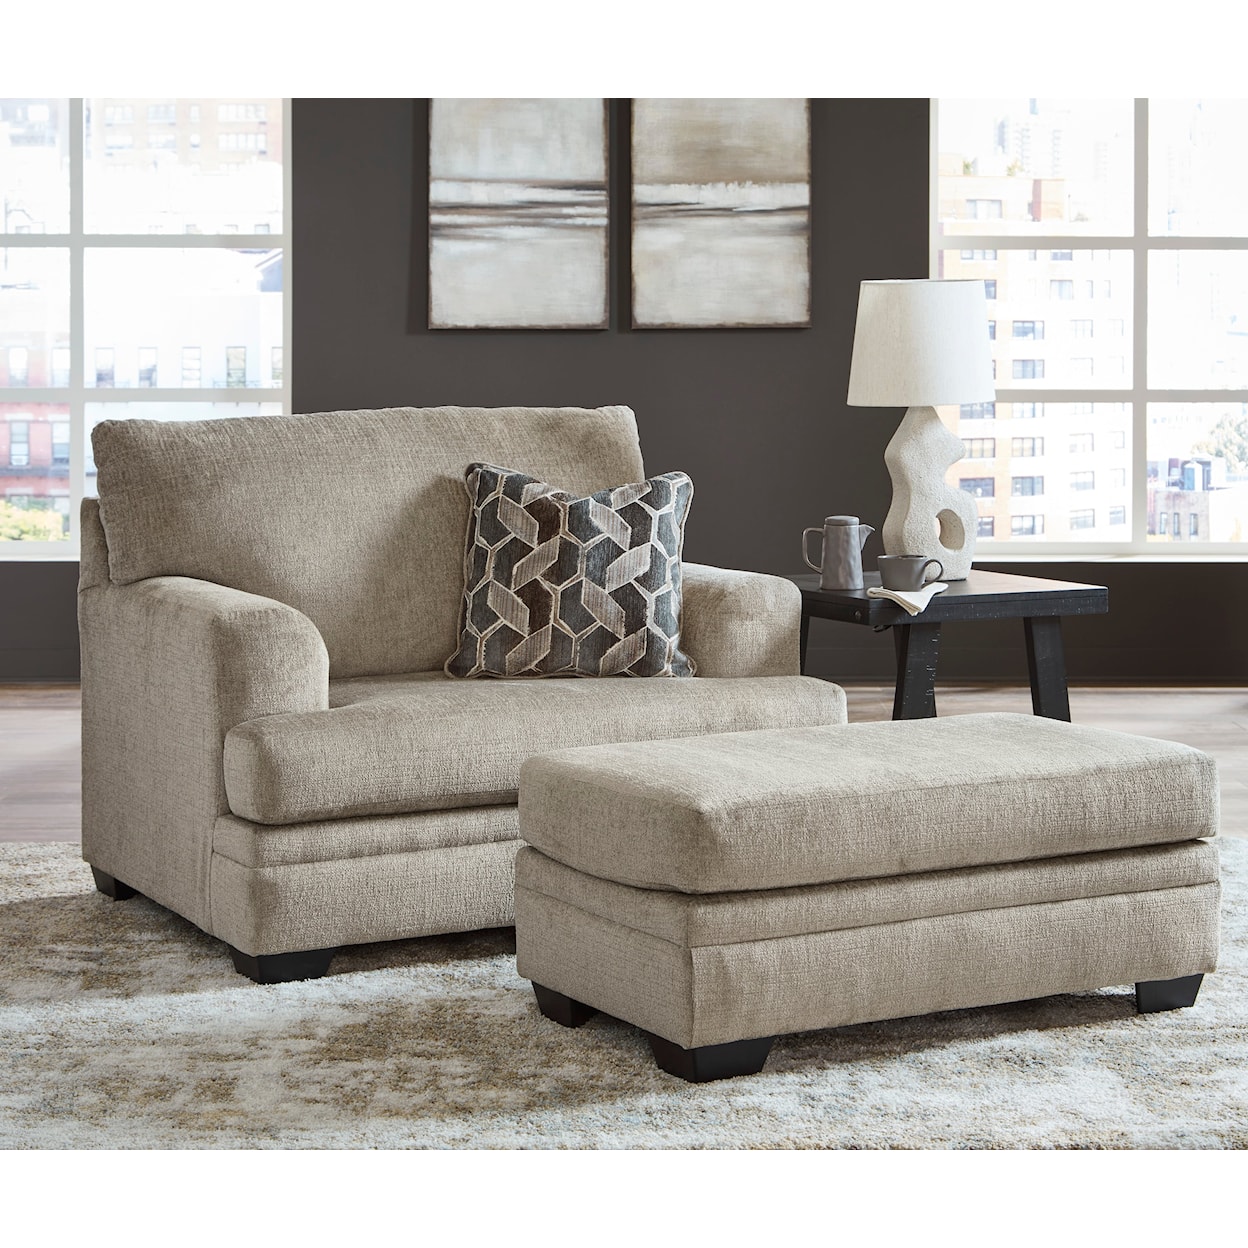 Signature Design Stonemeade Oversized Chair and Ottoman